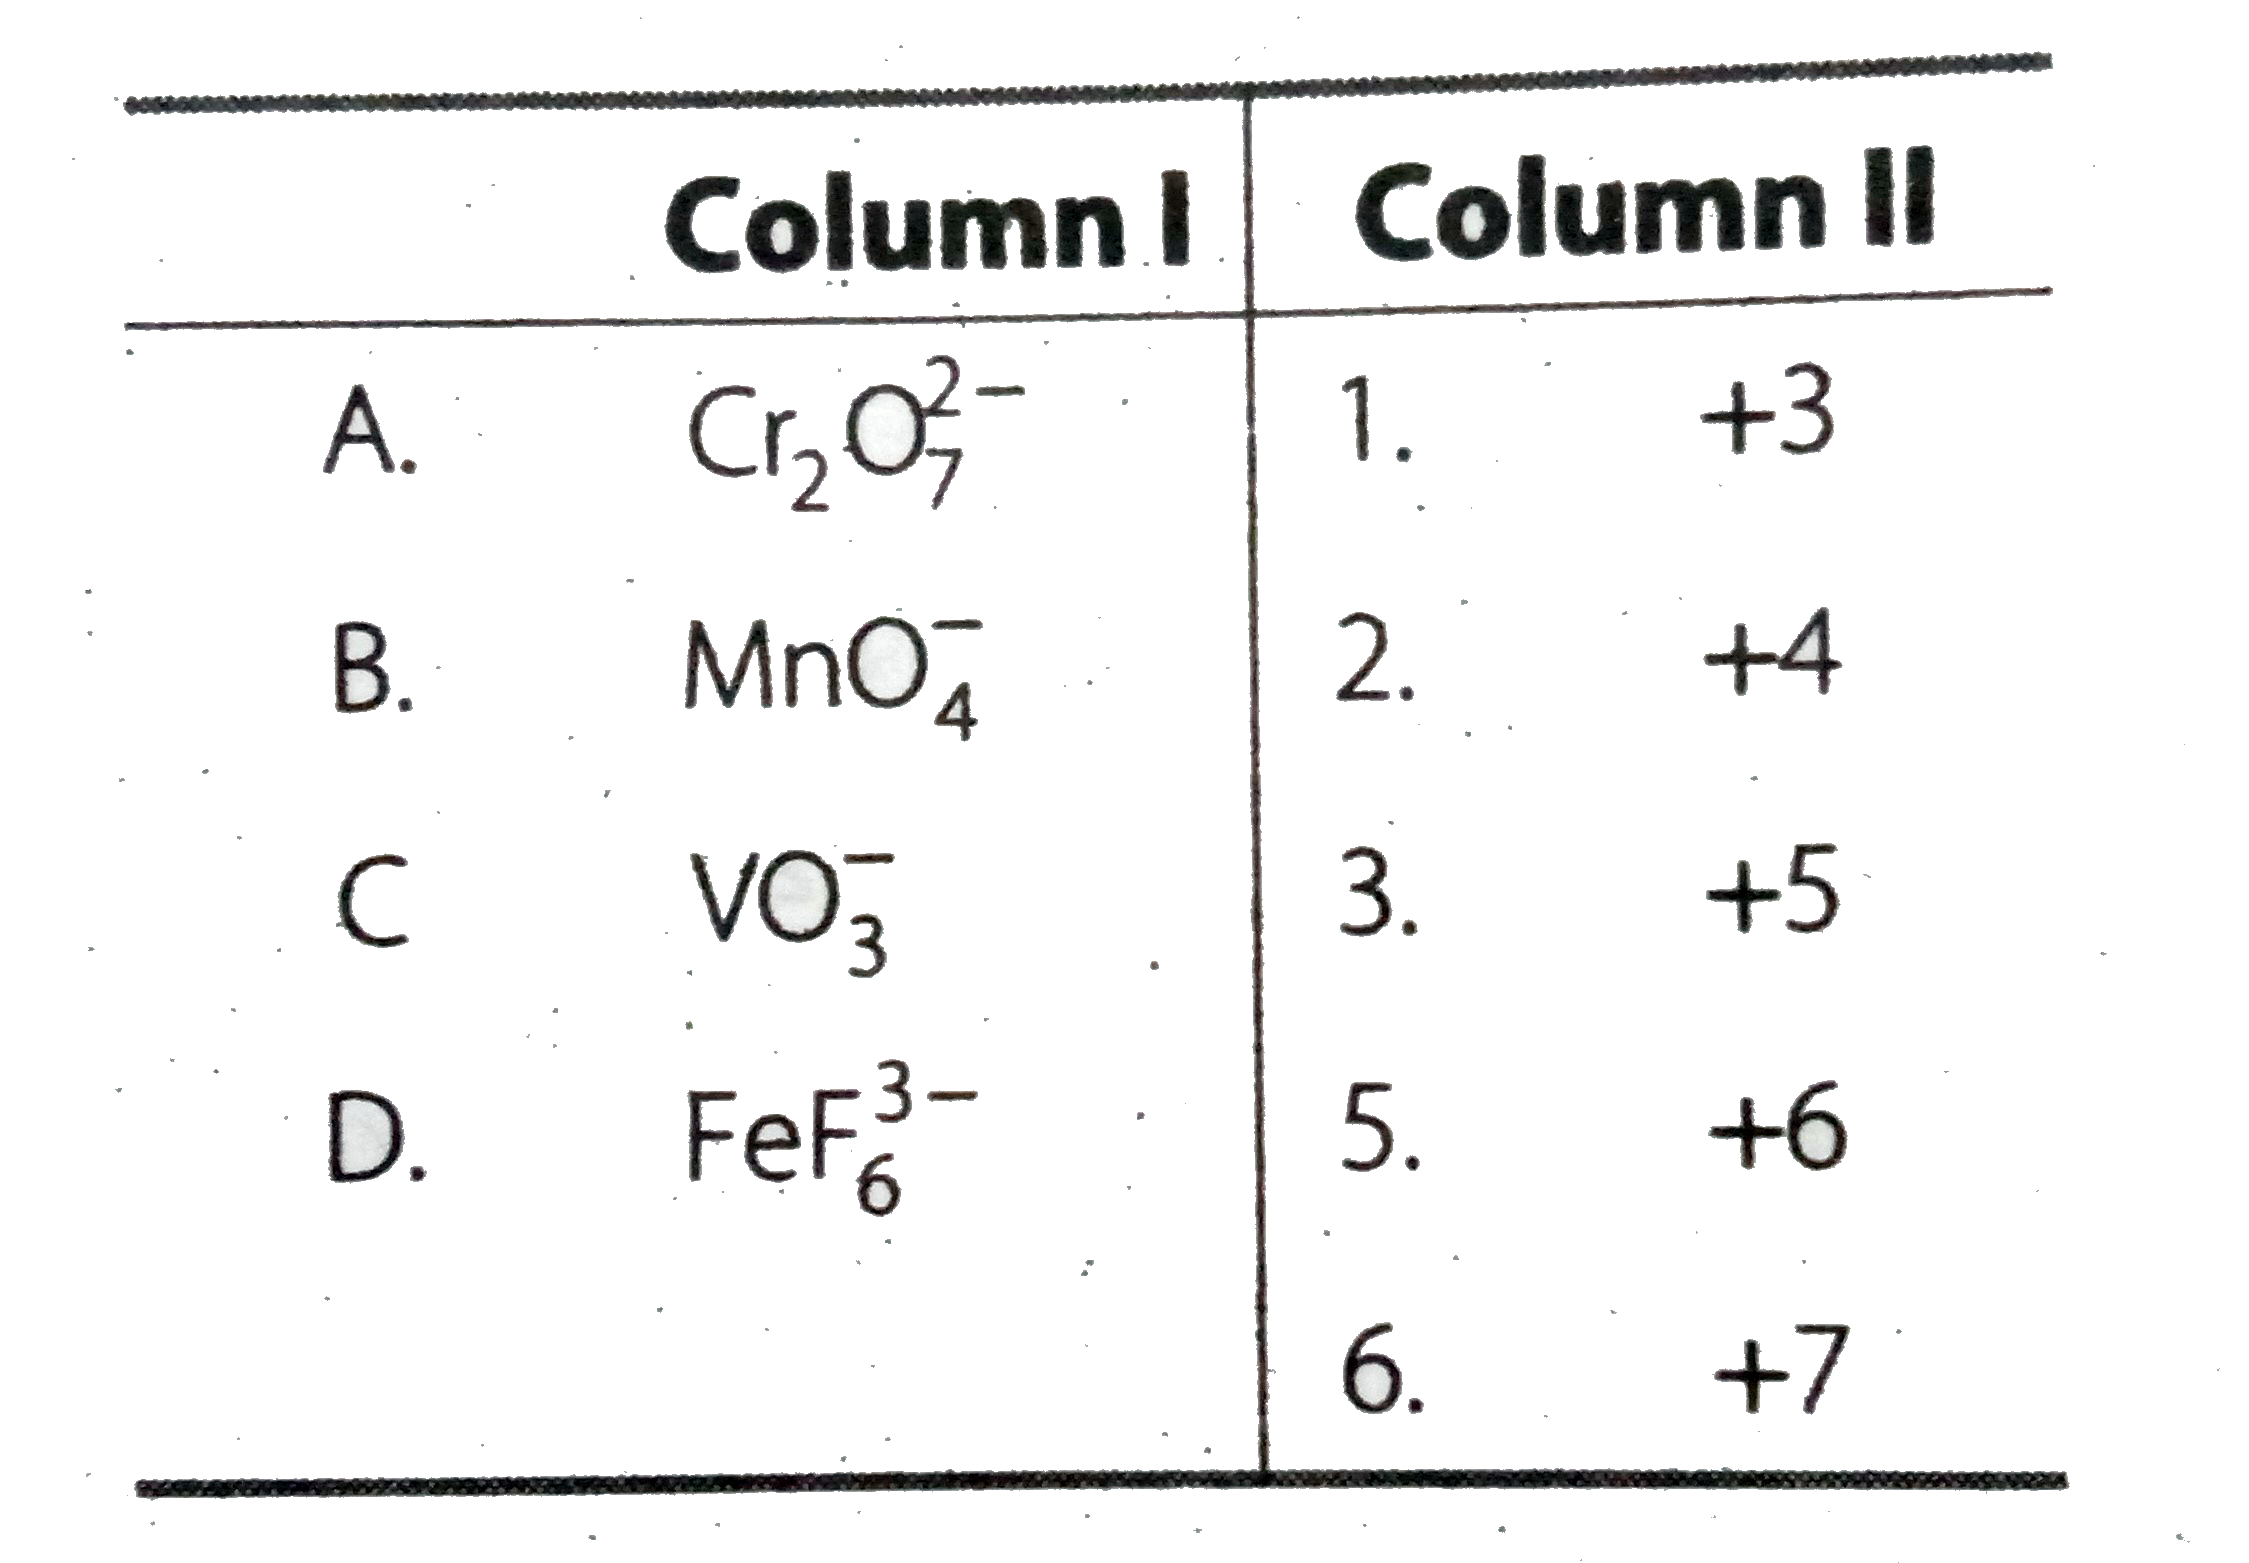 Match column I and column II for the oxidation states of the central atoms.